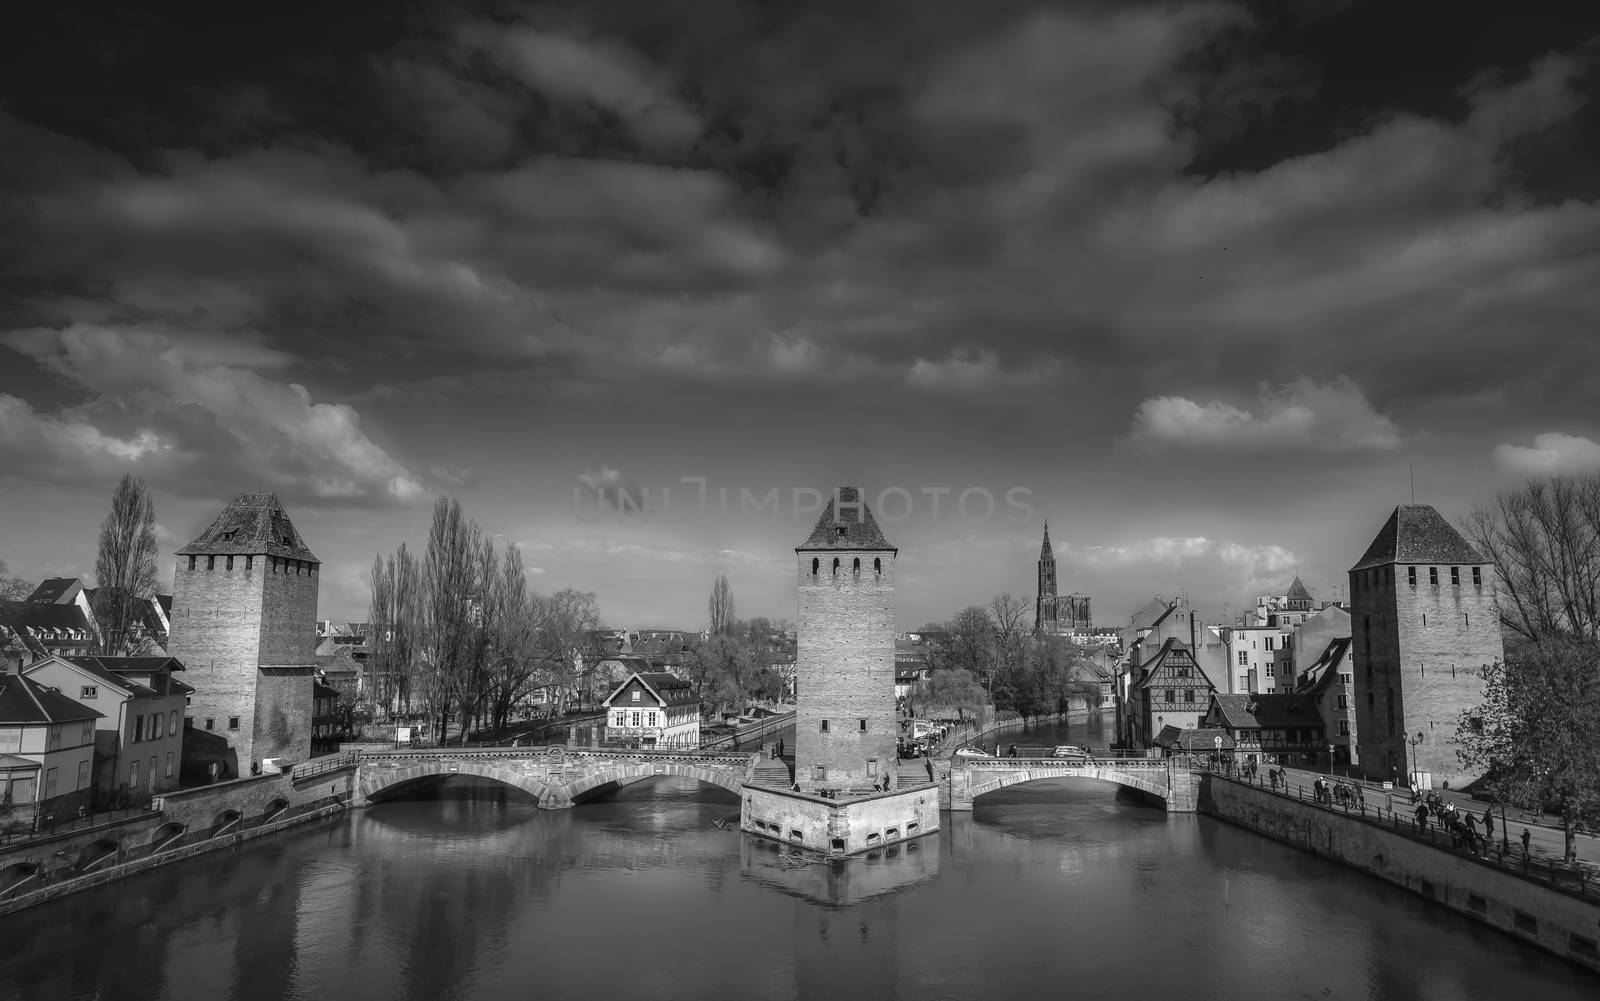 Black and white image of "Les ponts couverts" (the covered bridges), Strasbourg, Alsace, France, with a dramatic cloudscape.